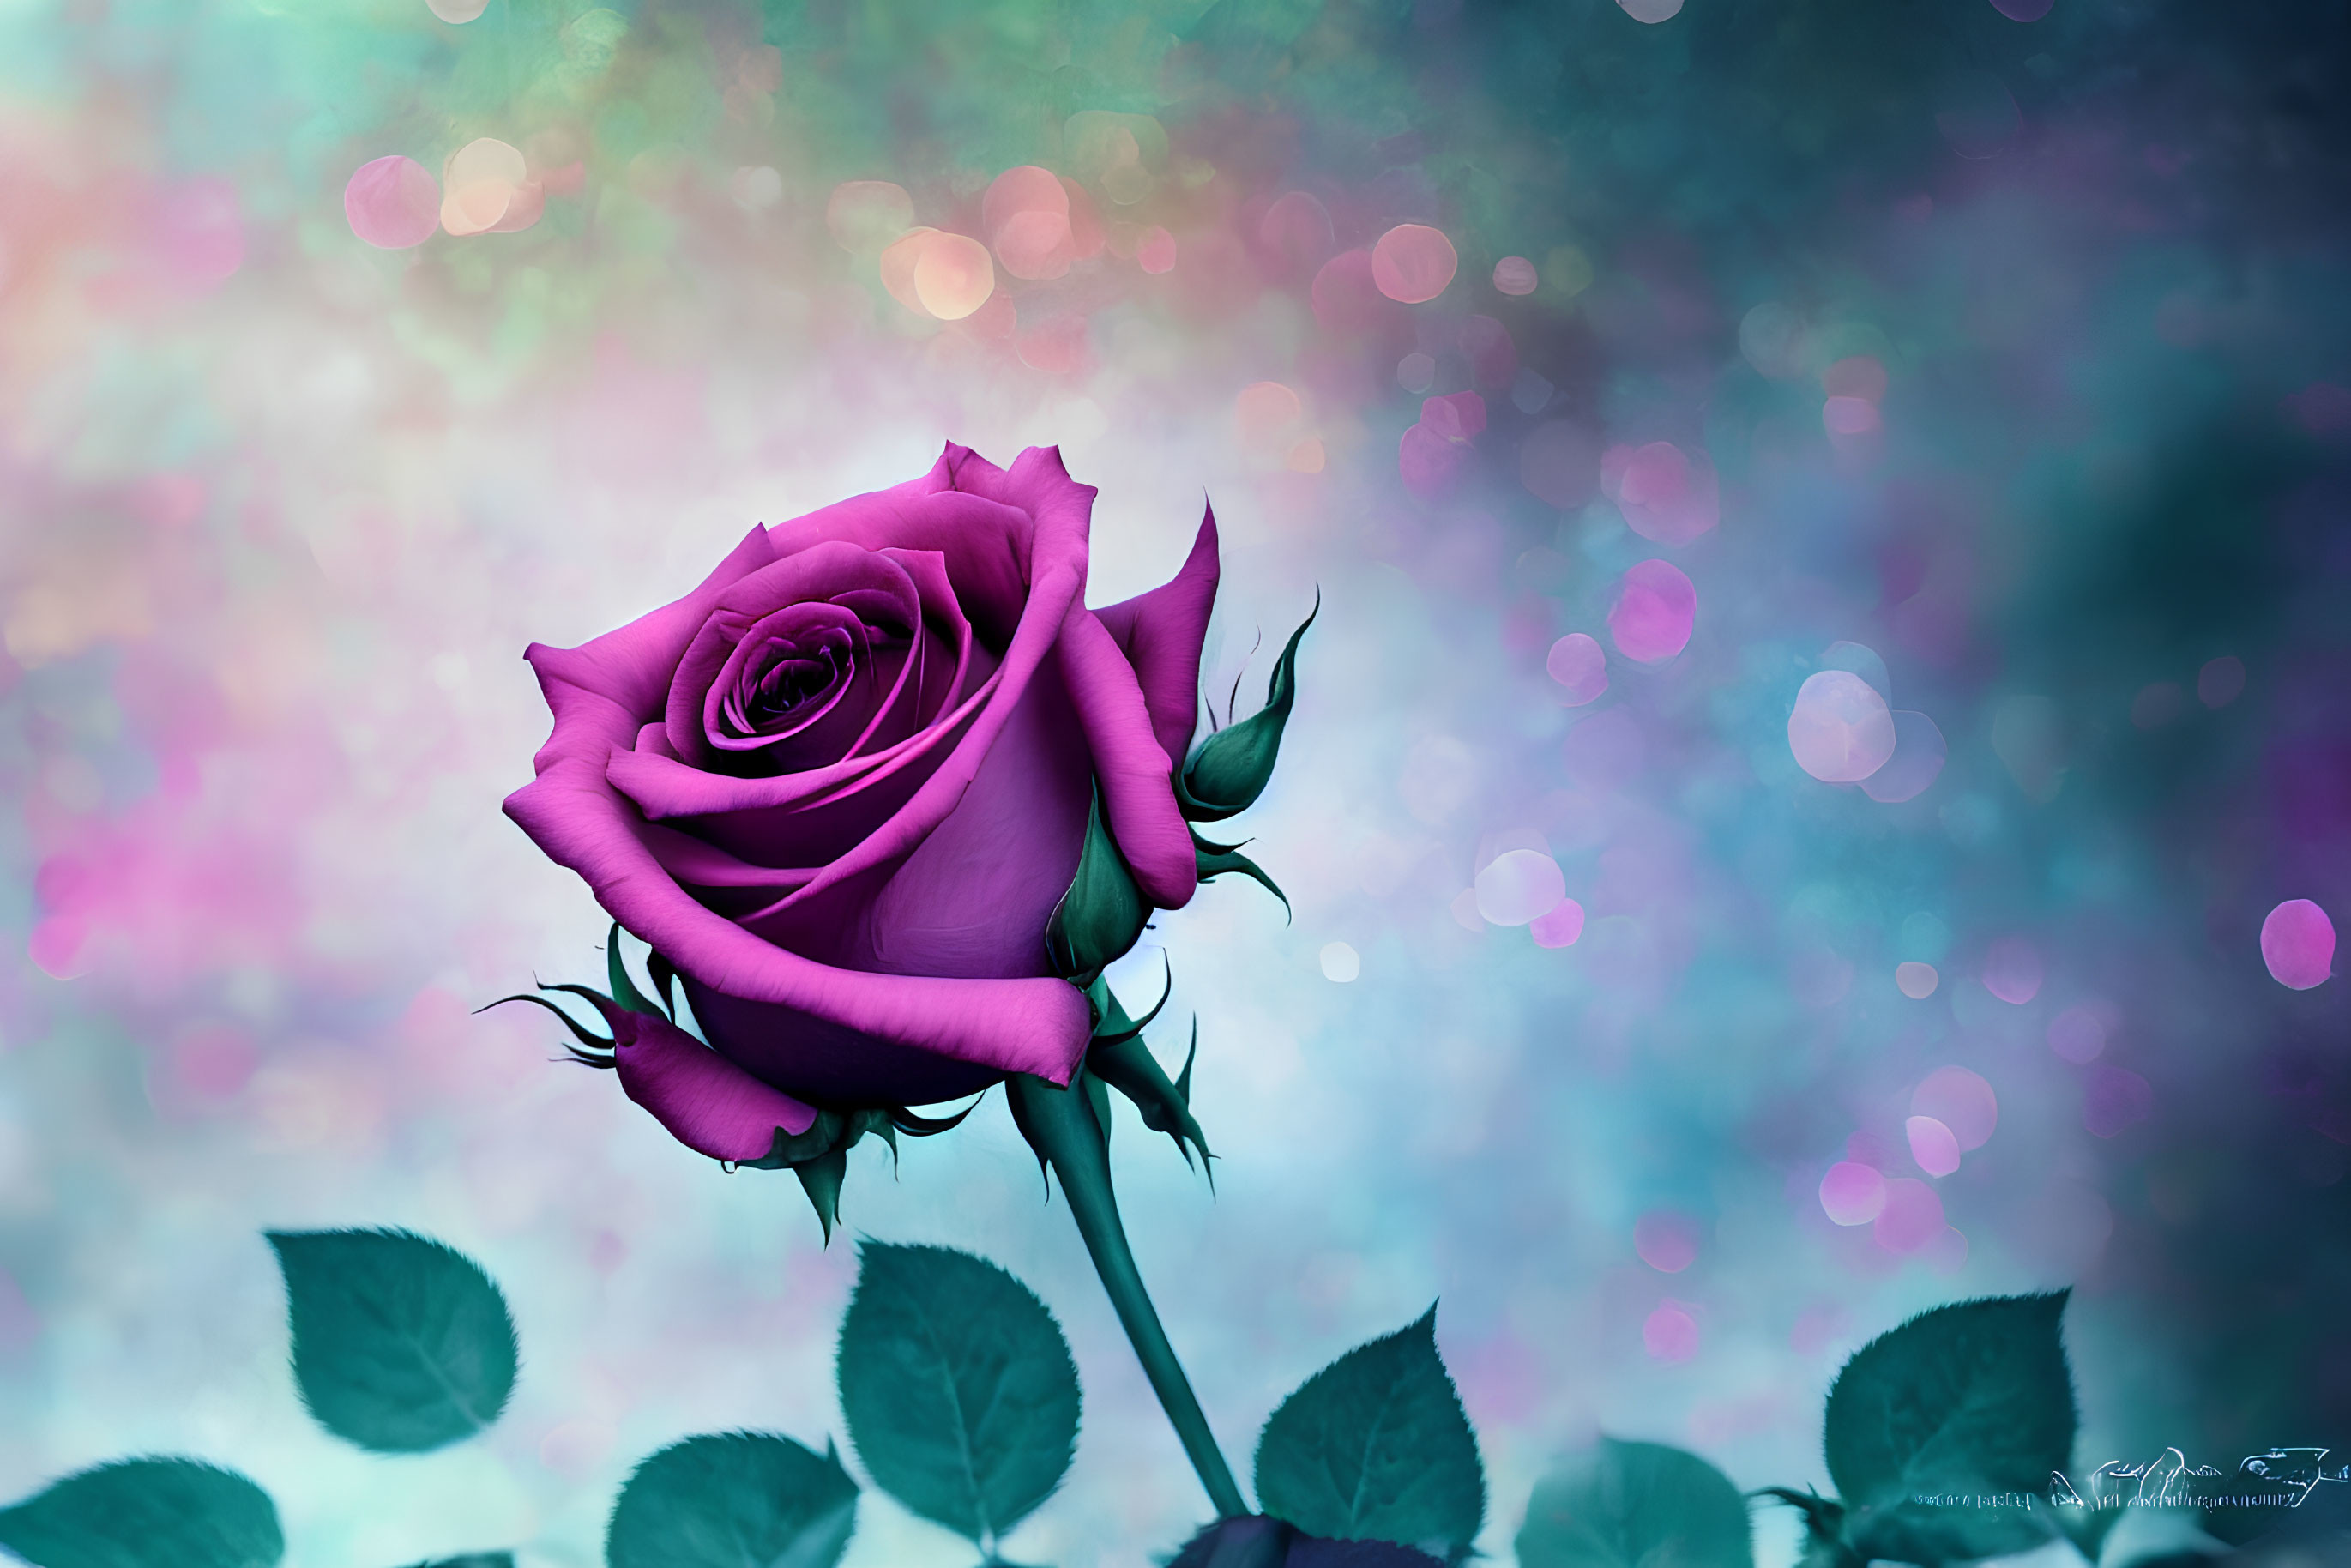 Vibrant Purple Rose with Green Leaves on Teal, Pink, and Purple Bokeh Background